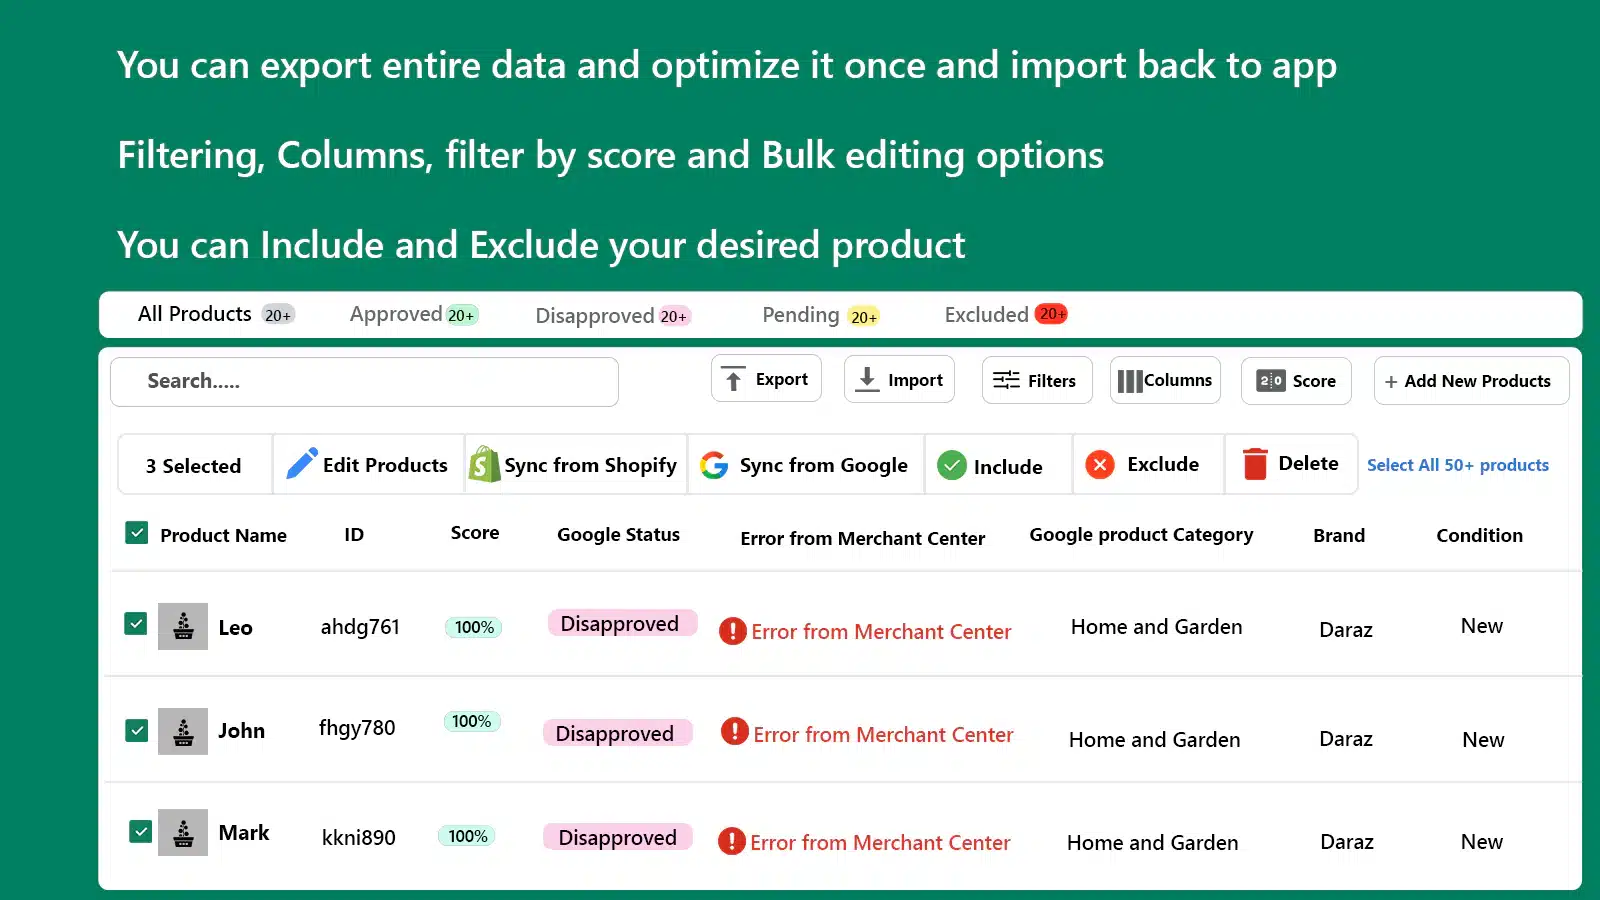 easy-feed-for-google-shopping-export-import